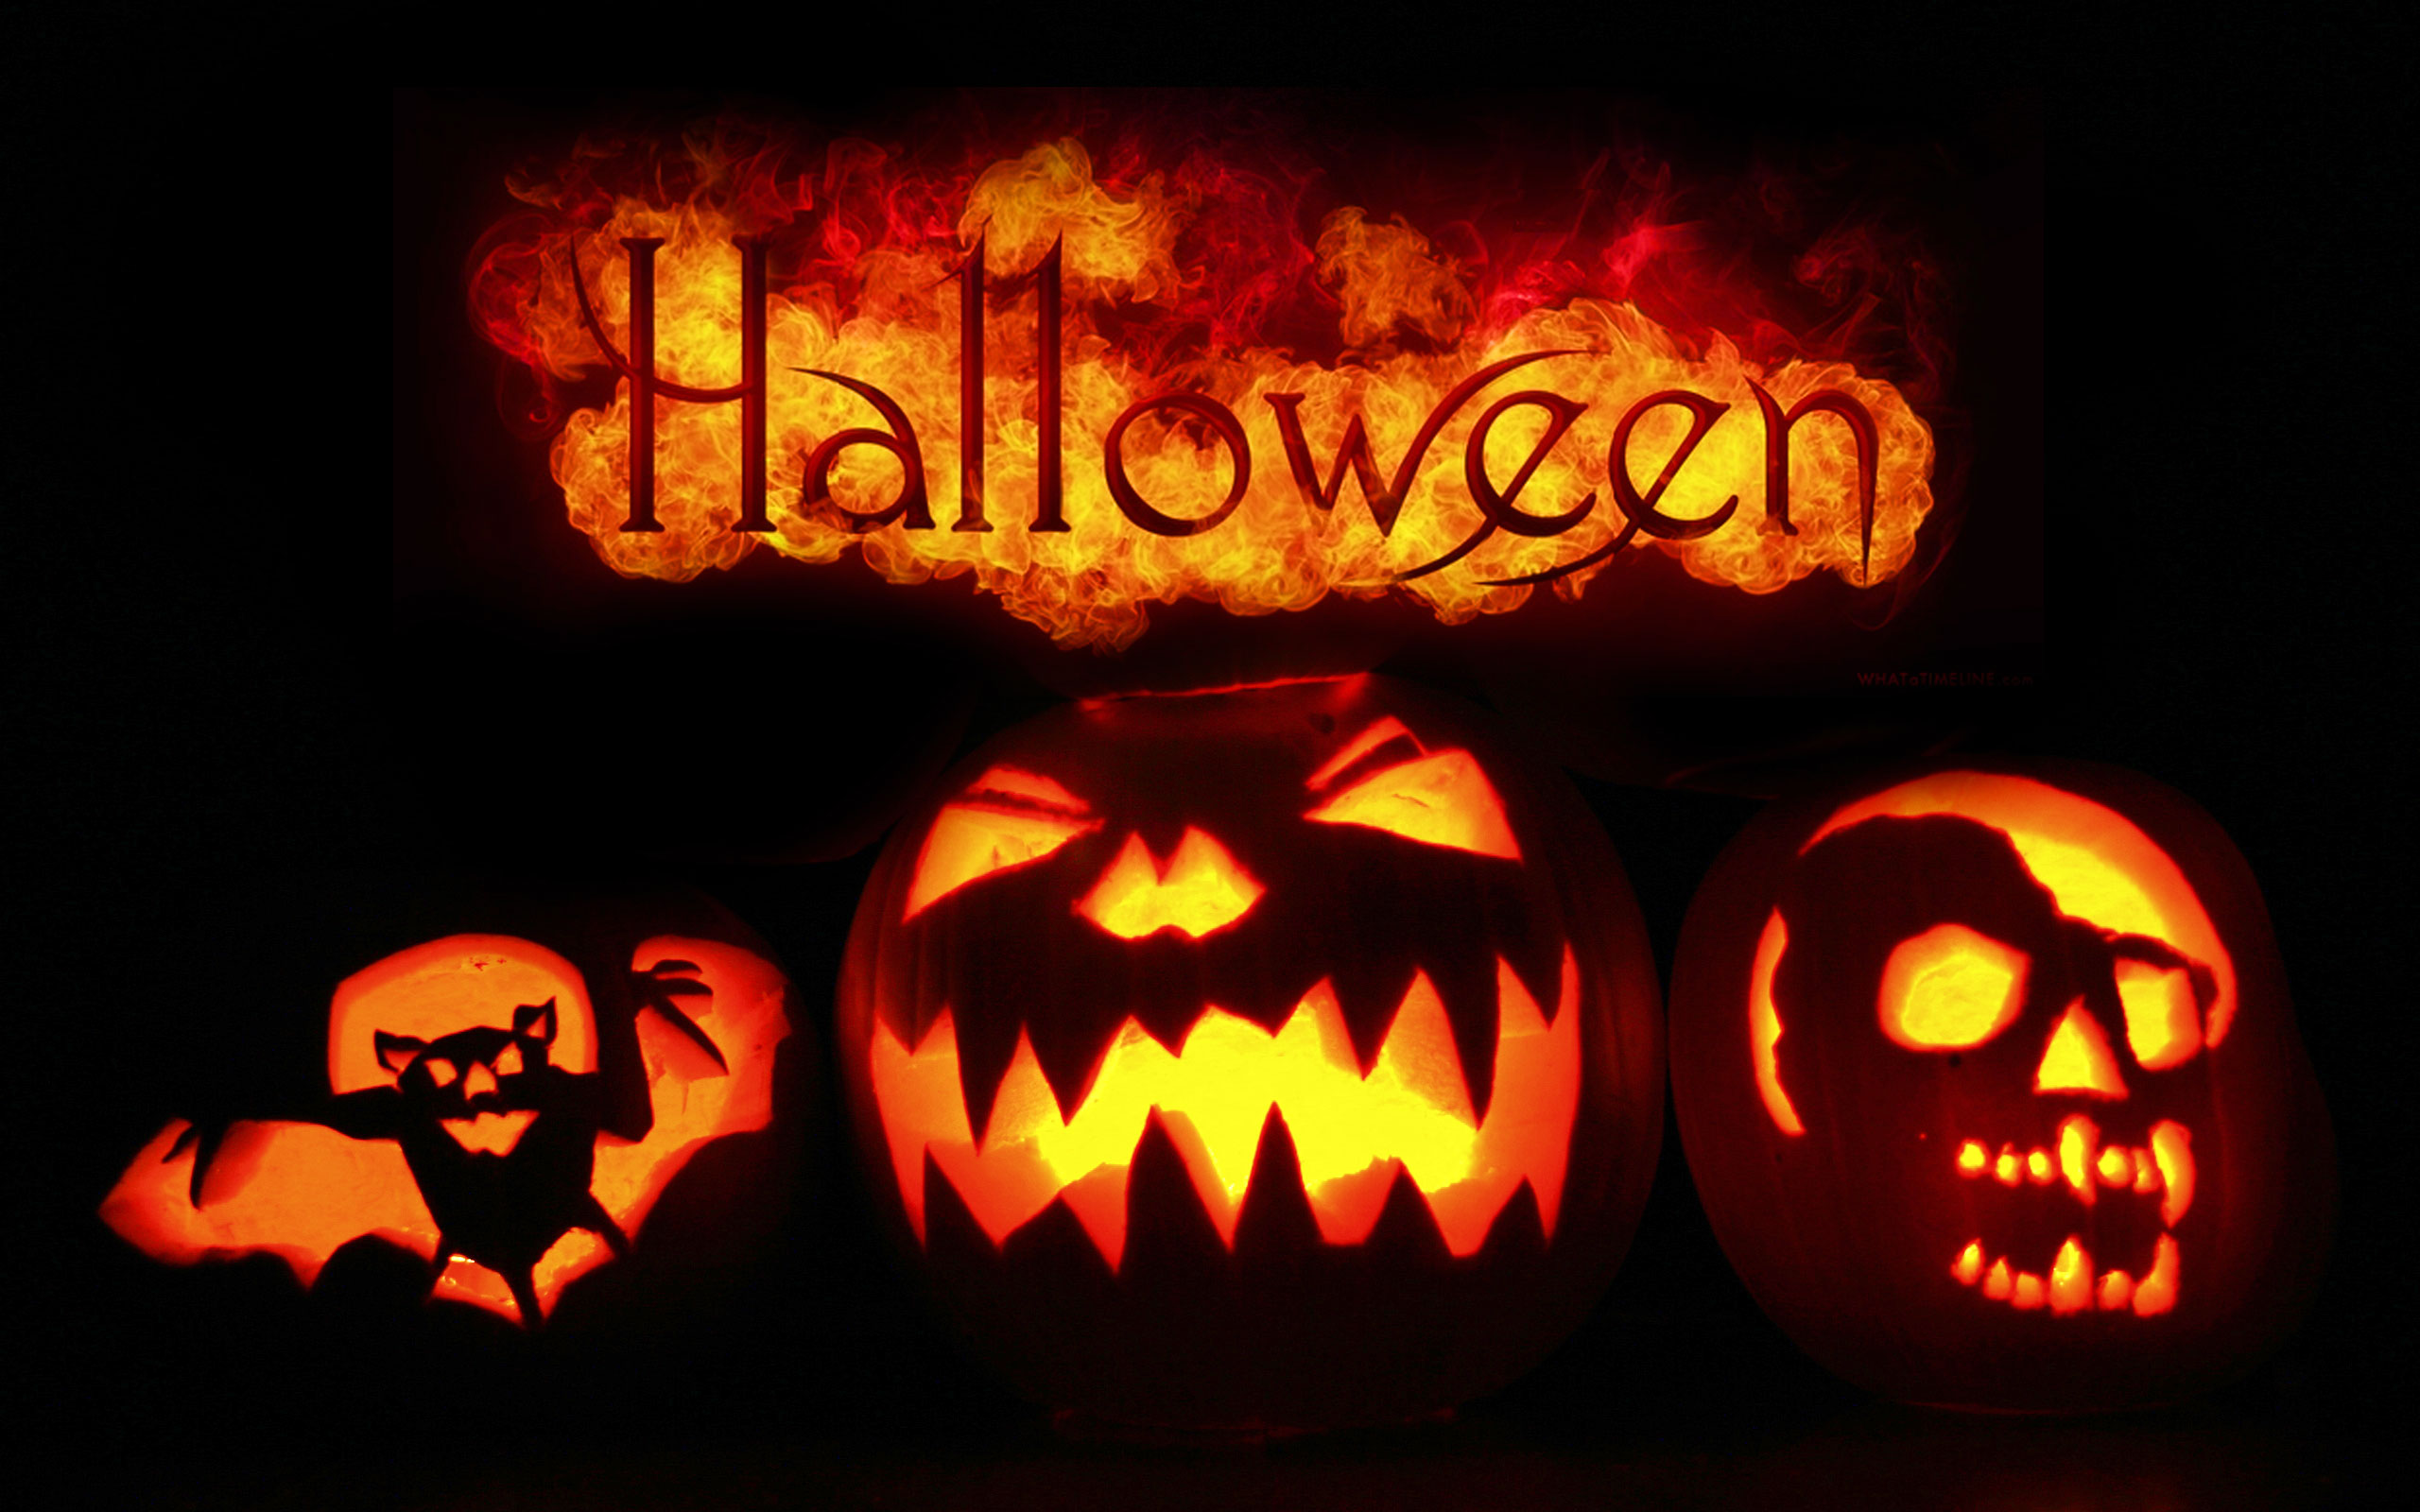 halloween burning text picture